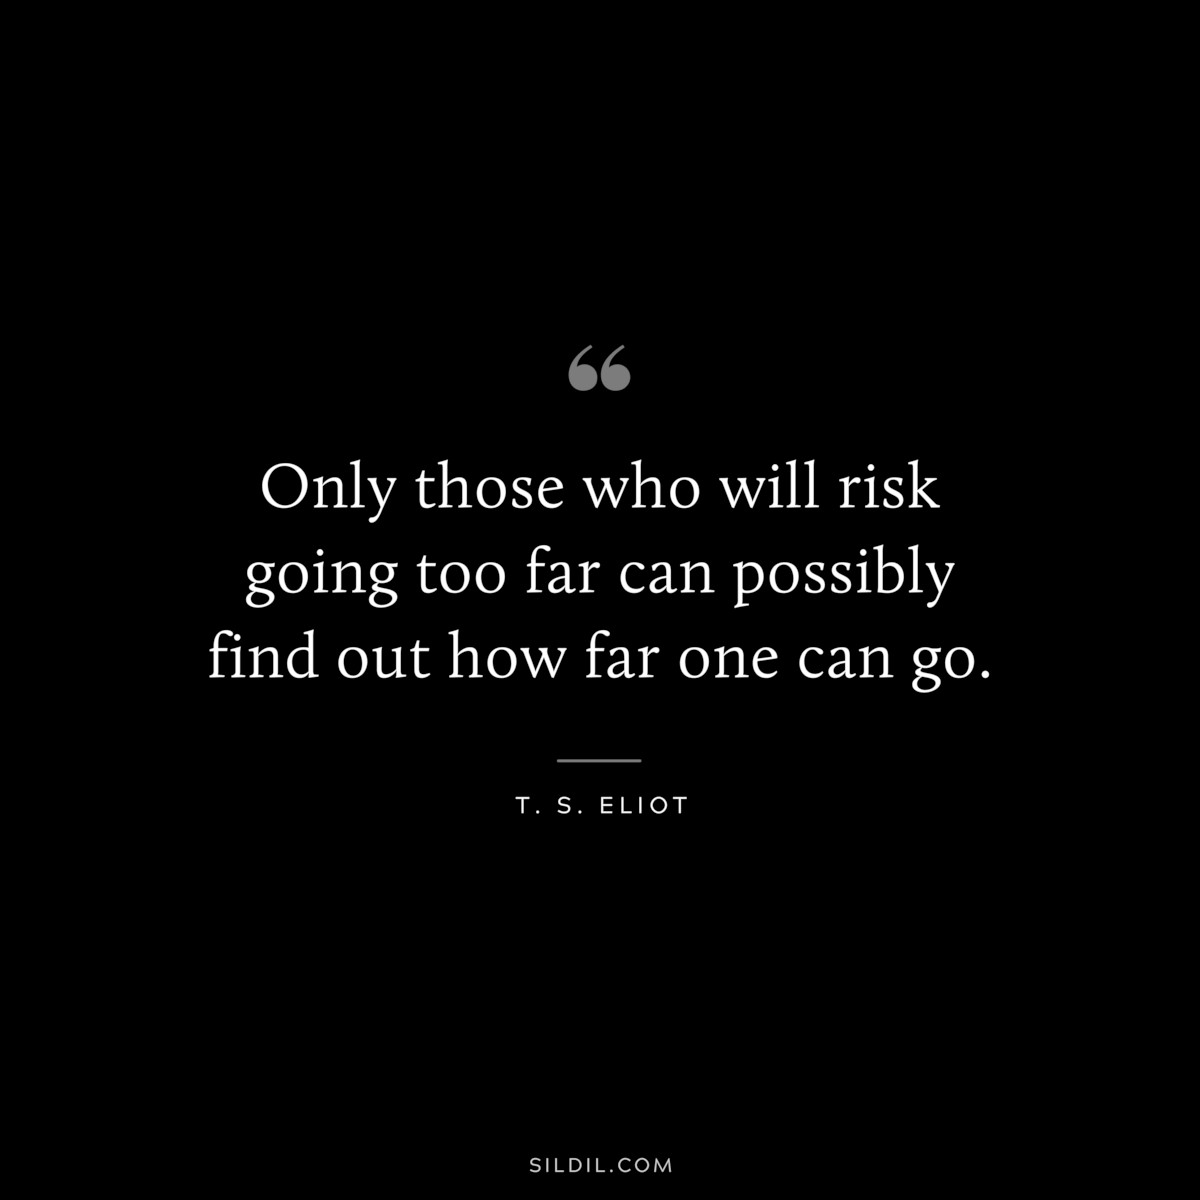 Only those who will risk going too far can possibly find out how far one can go. ― T. S. Eliot